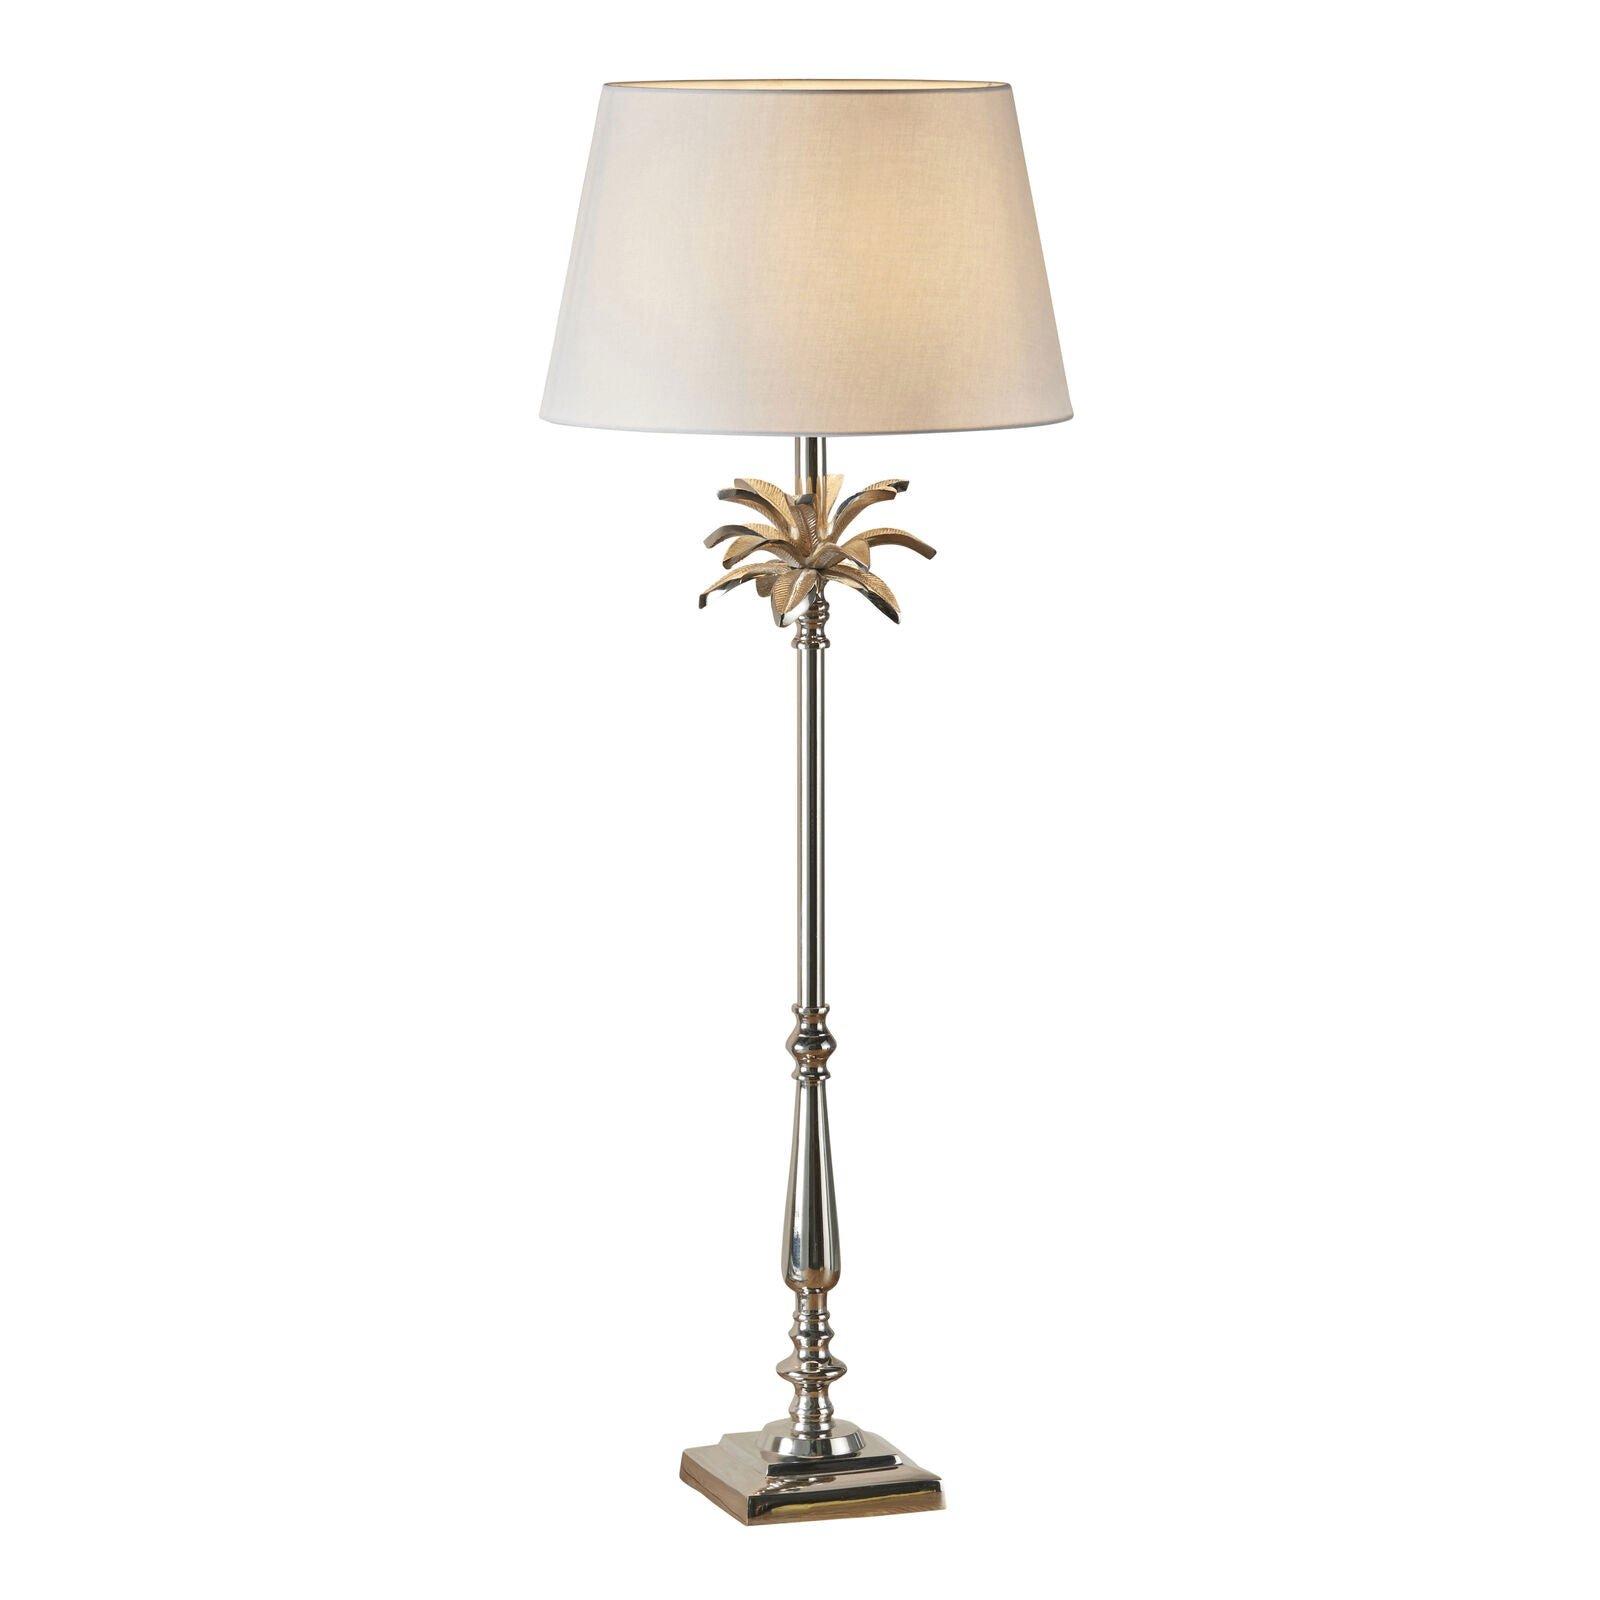 Table Lamp Polished Nickel Plate & Pale Grey Cotton 60W E27 Bedside Light